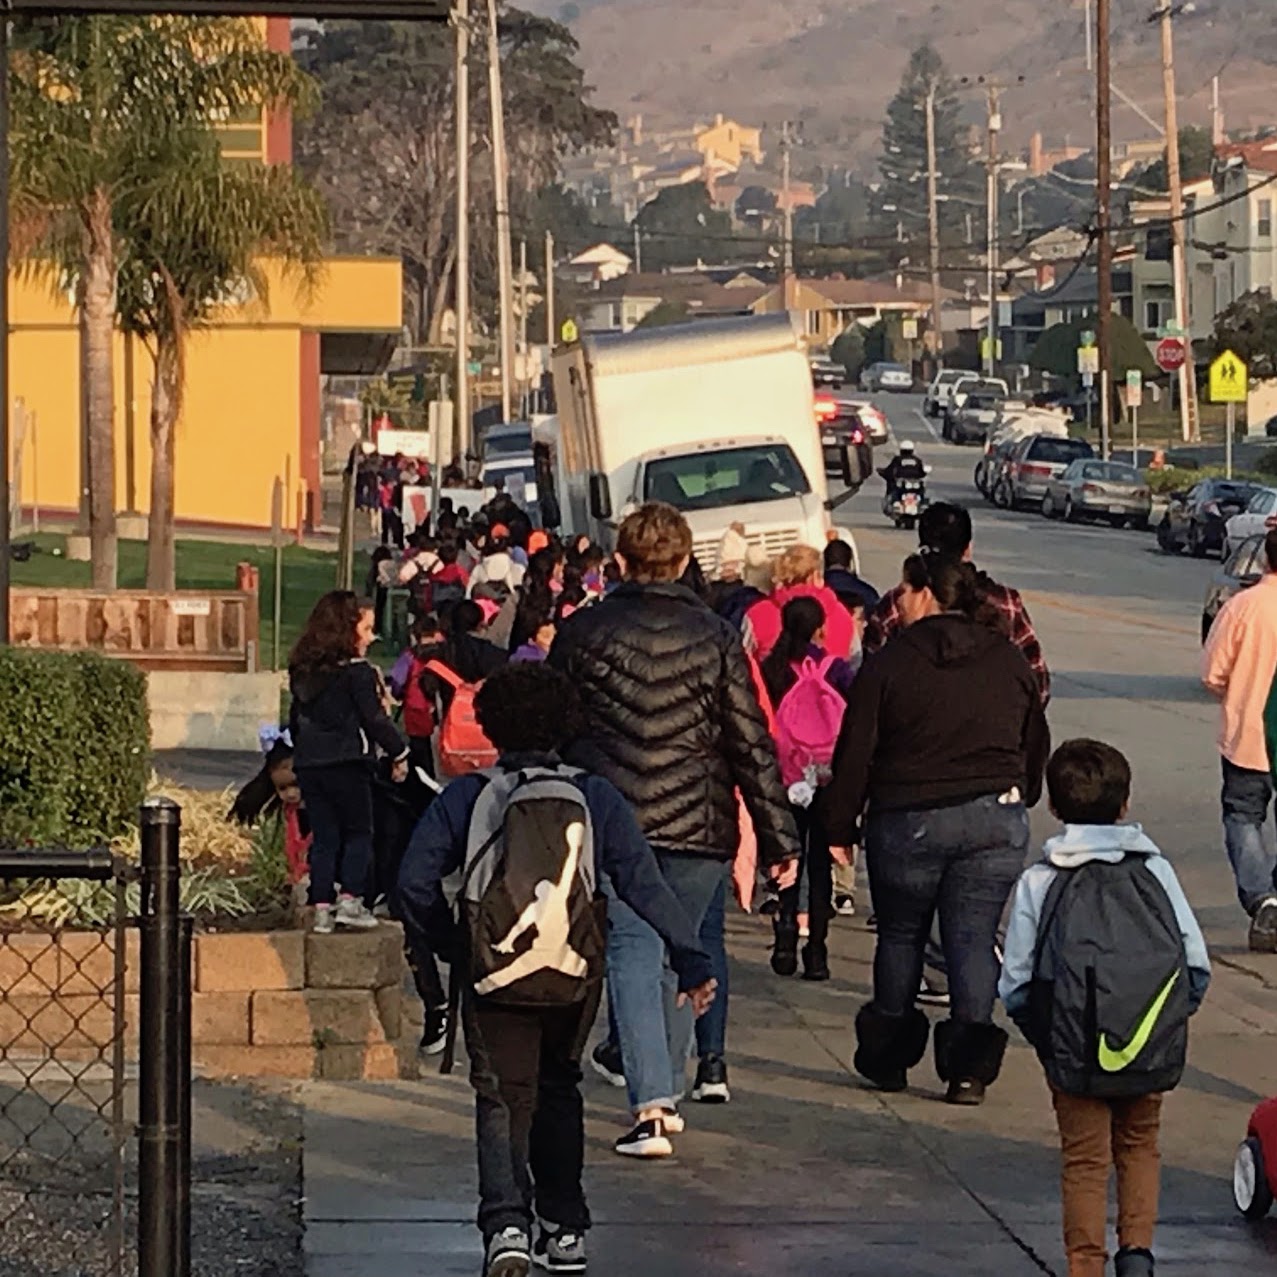 Students and adults walk down the street